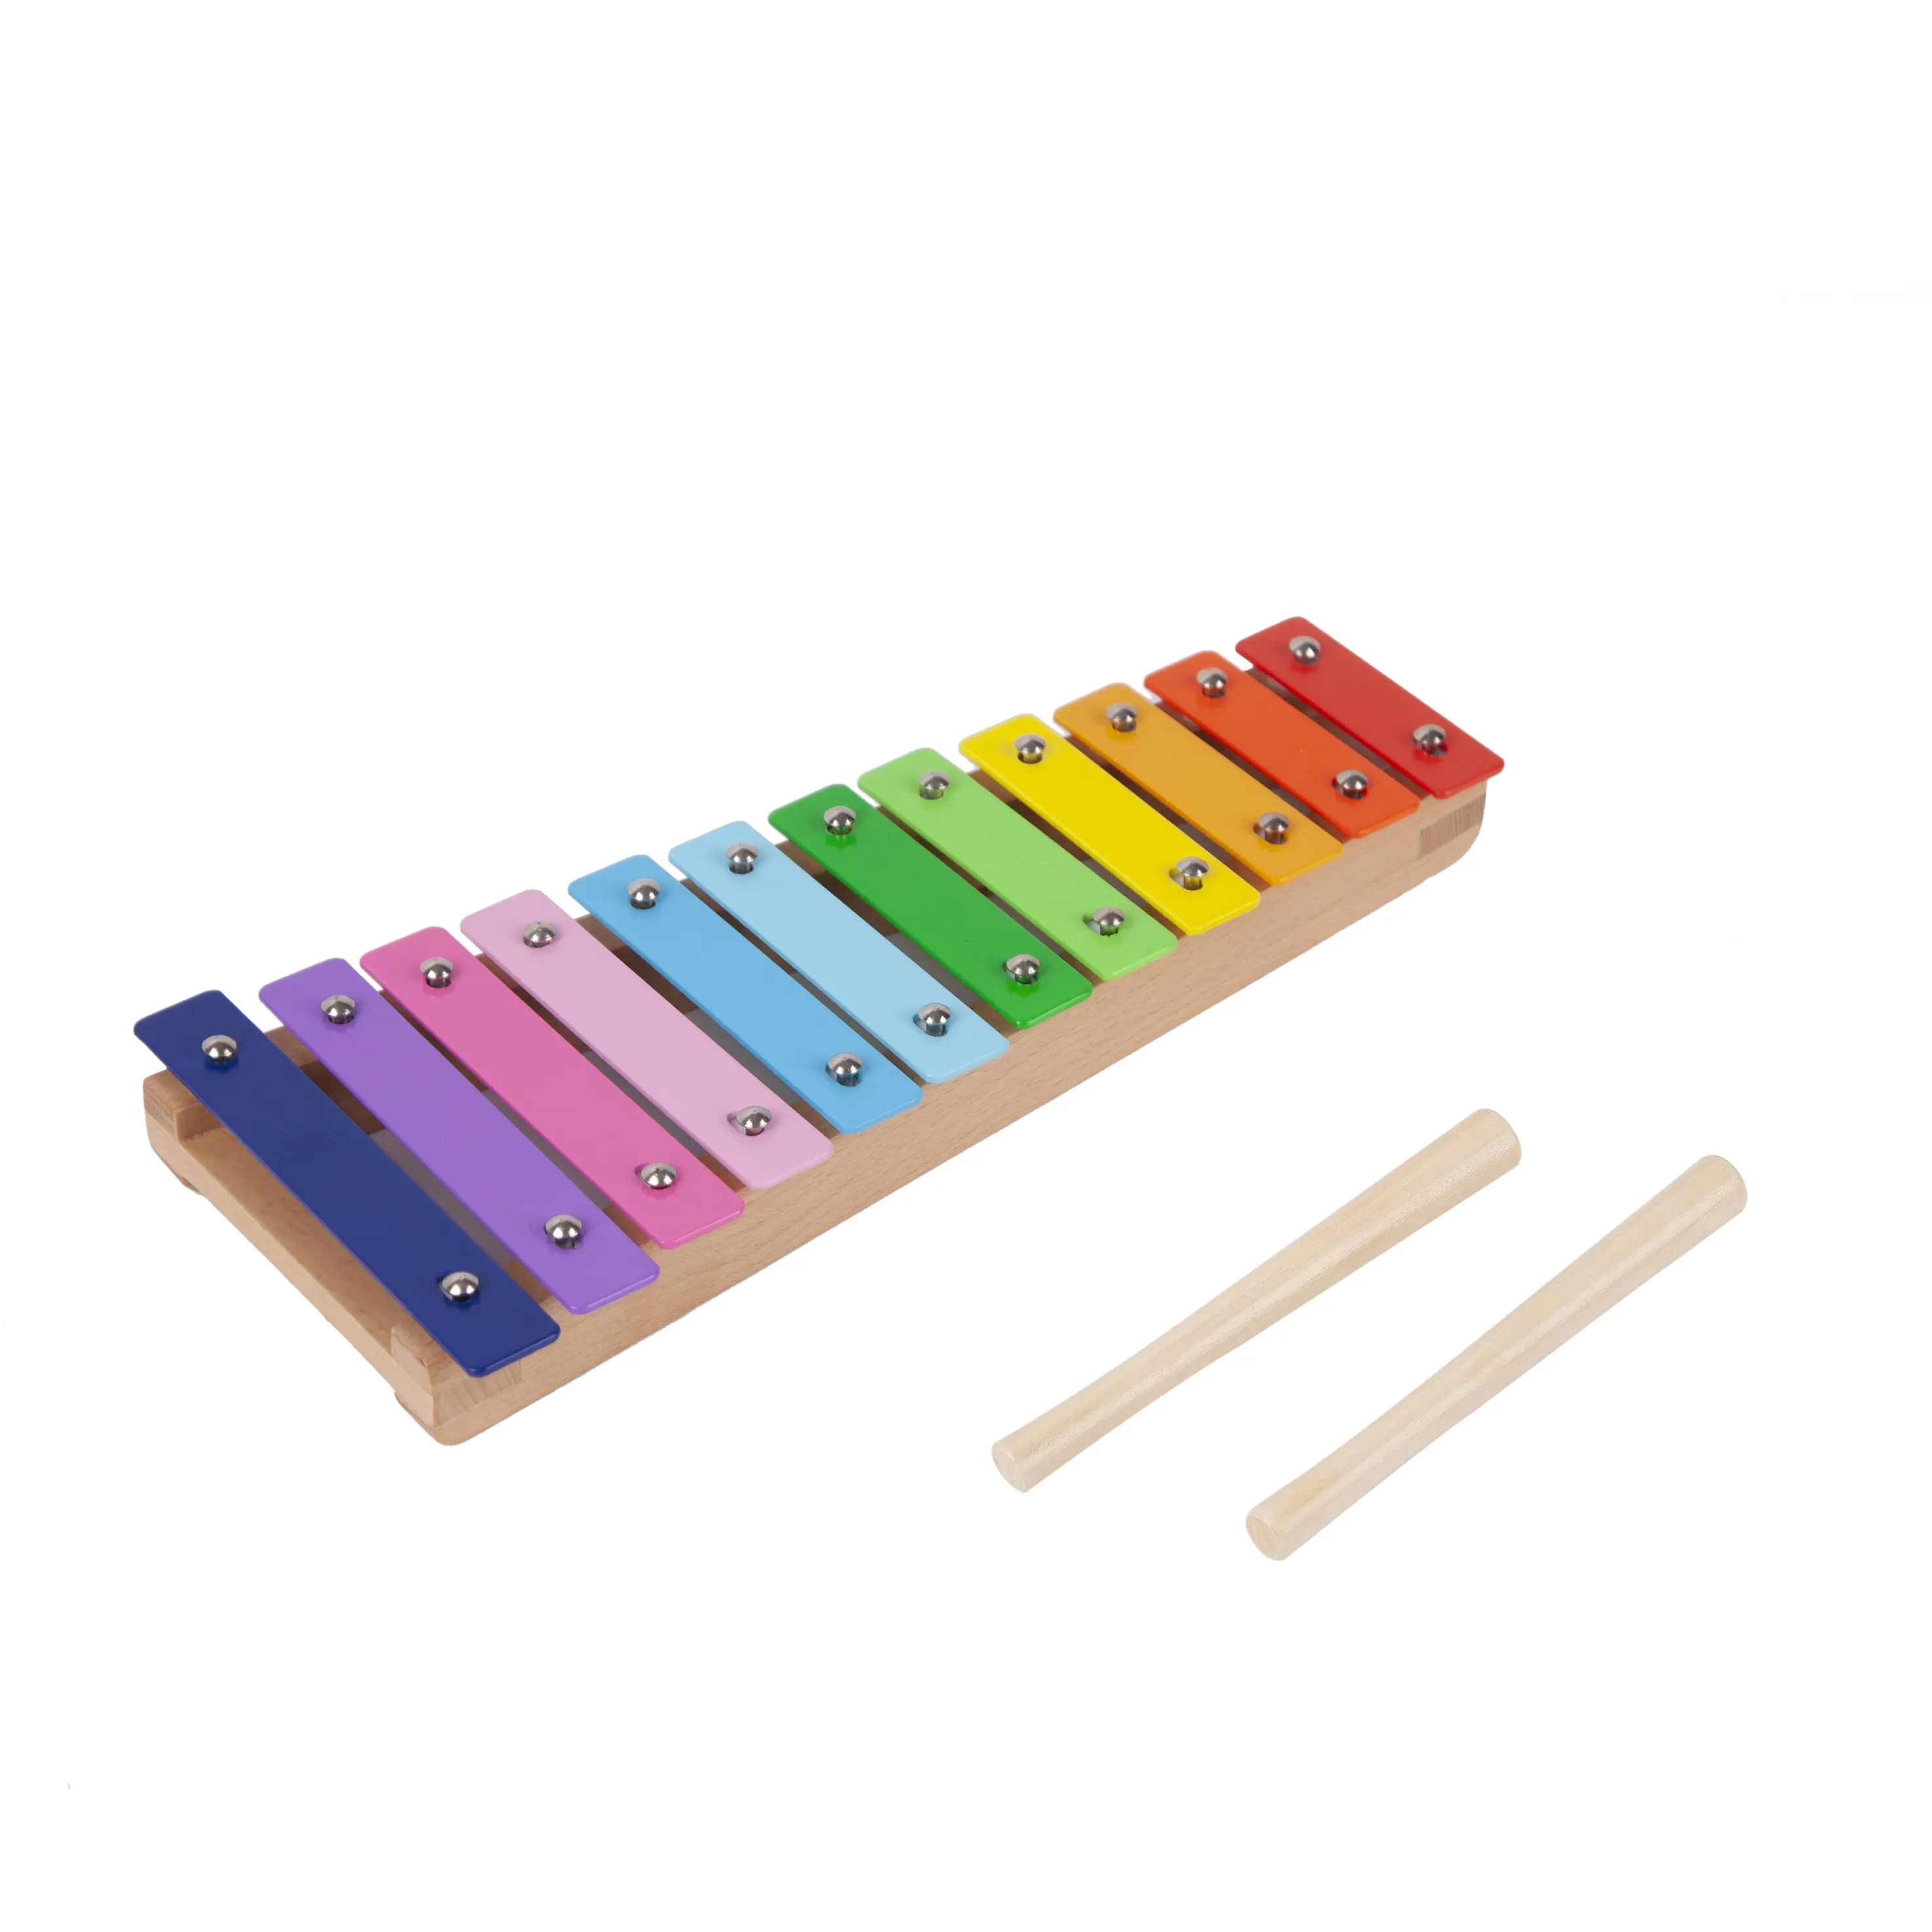 Baby Musical Fun Toys Wooden Baby Music Instruments Toy Xylophone for Children Girls Educational Toys Gifts